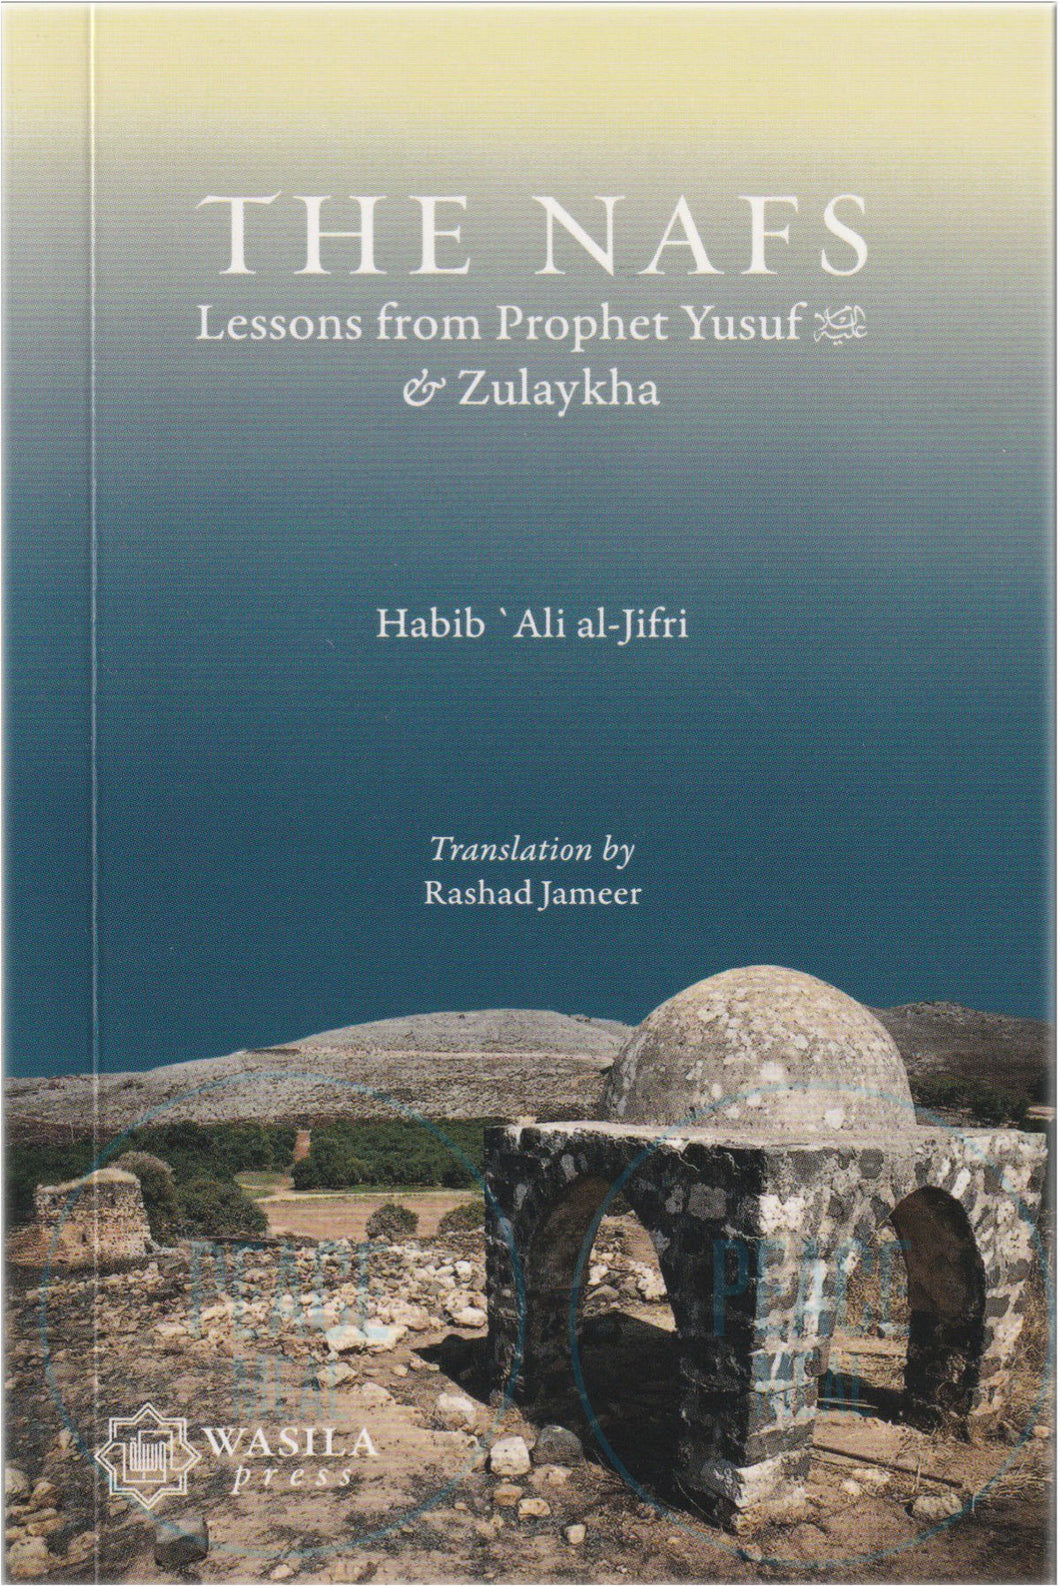 The Nafs: Lessons from Prophet Yusuf and Zulaikha